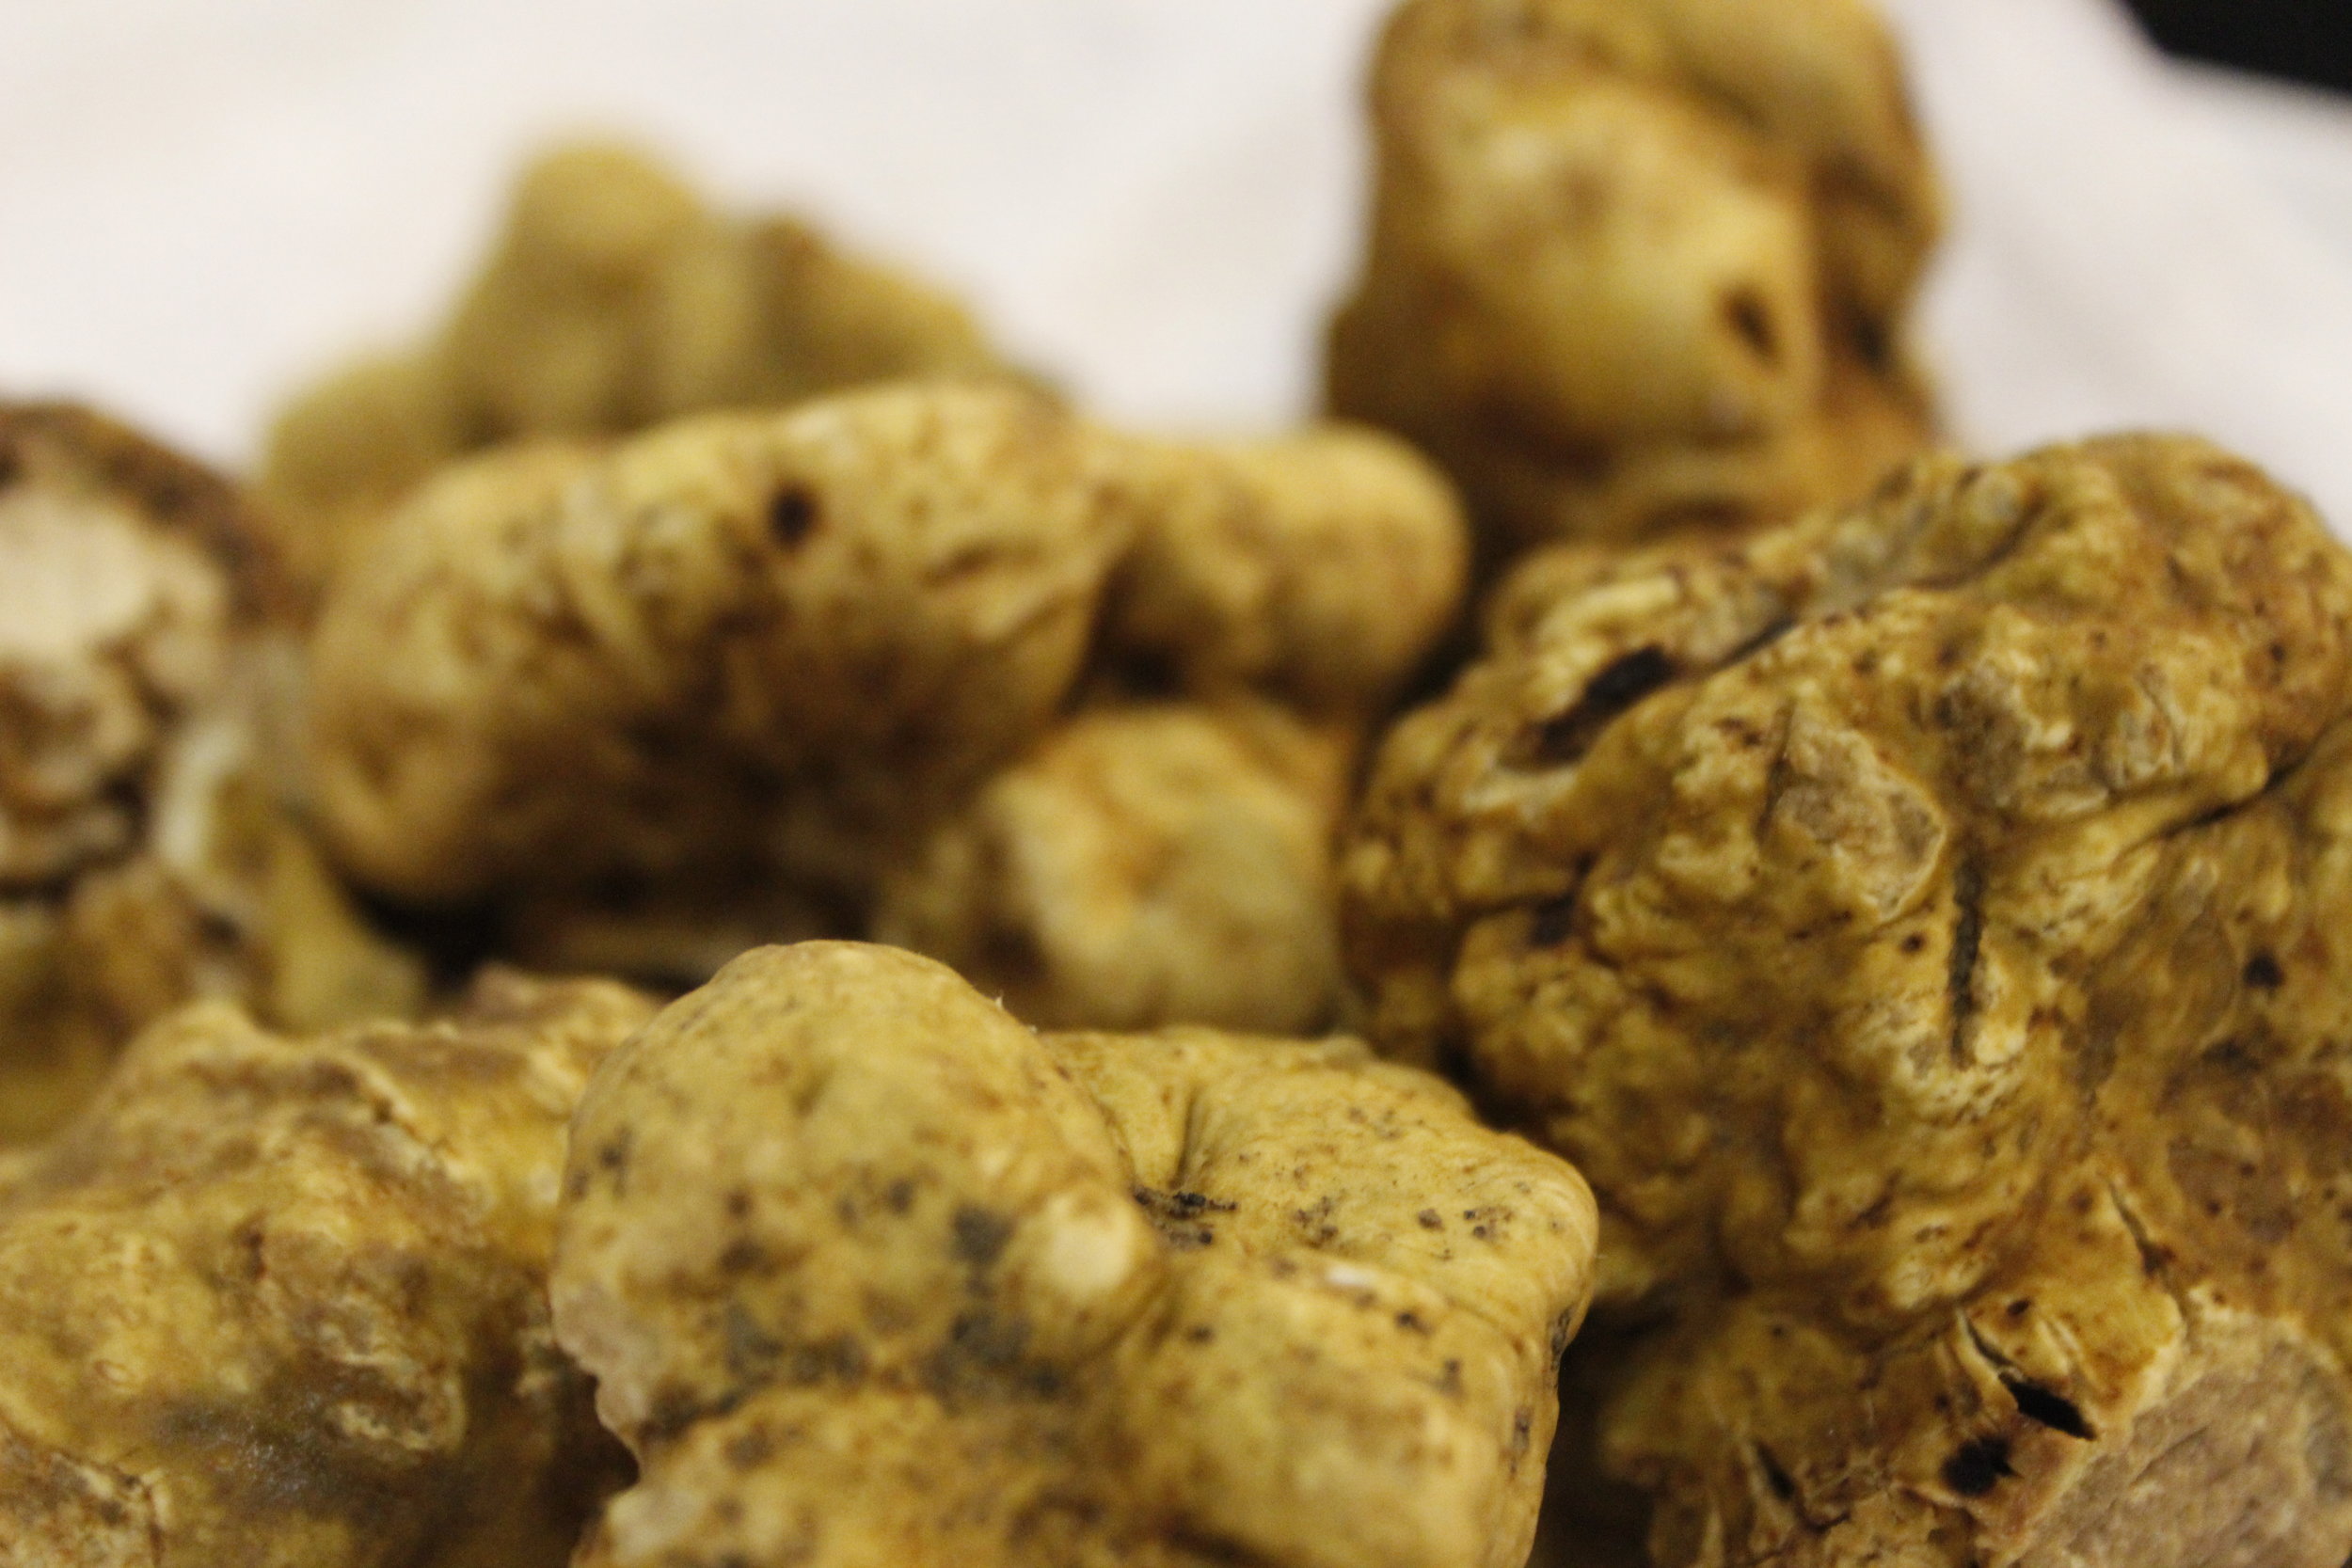  picture of white truffles 